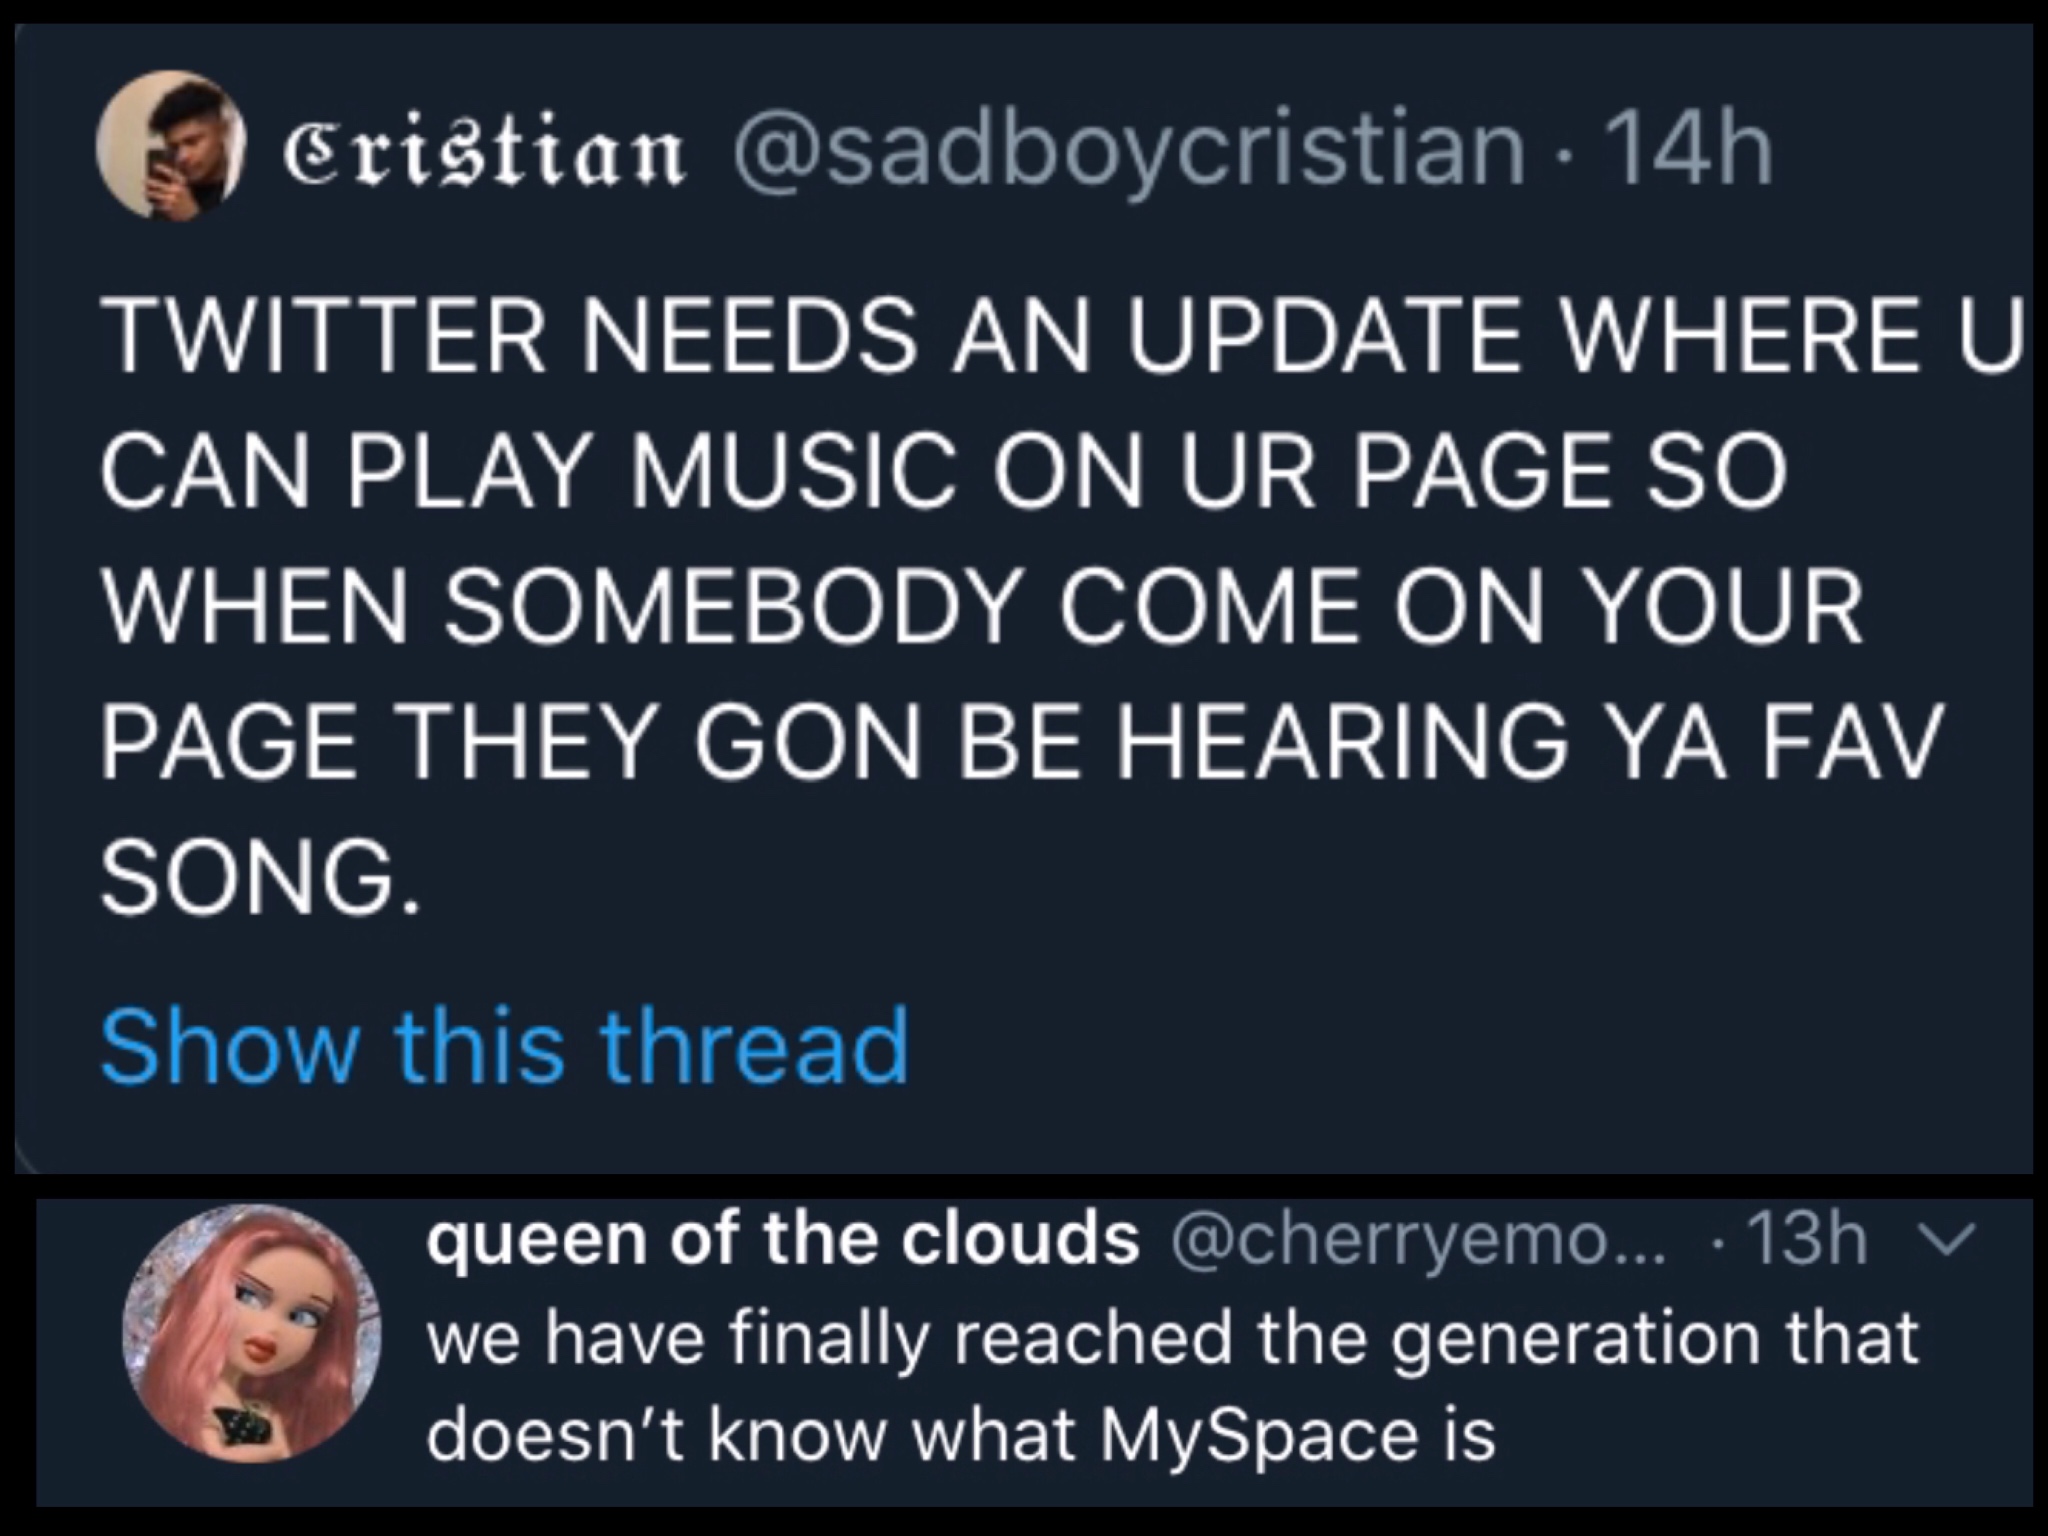 screenshot - Ca Cristian 14h Twitter Needs An Update Where U Can Play Music On Ur Page So When Somebody Come On Your Page They Gon Be Hearing Ya Fav Song. Show this thread queen of the clouds ... 13h vi we have finally reached the generation that doesn't 